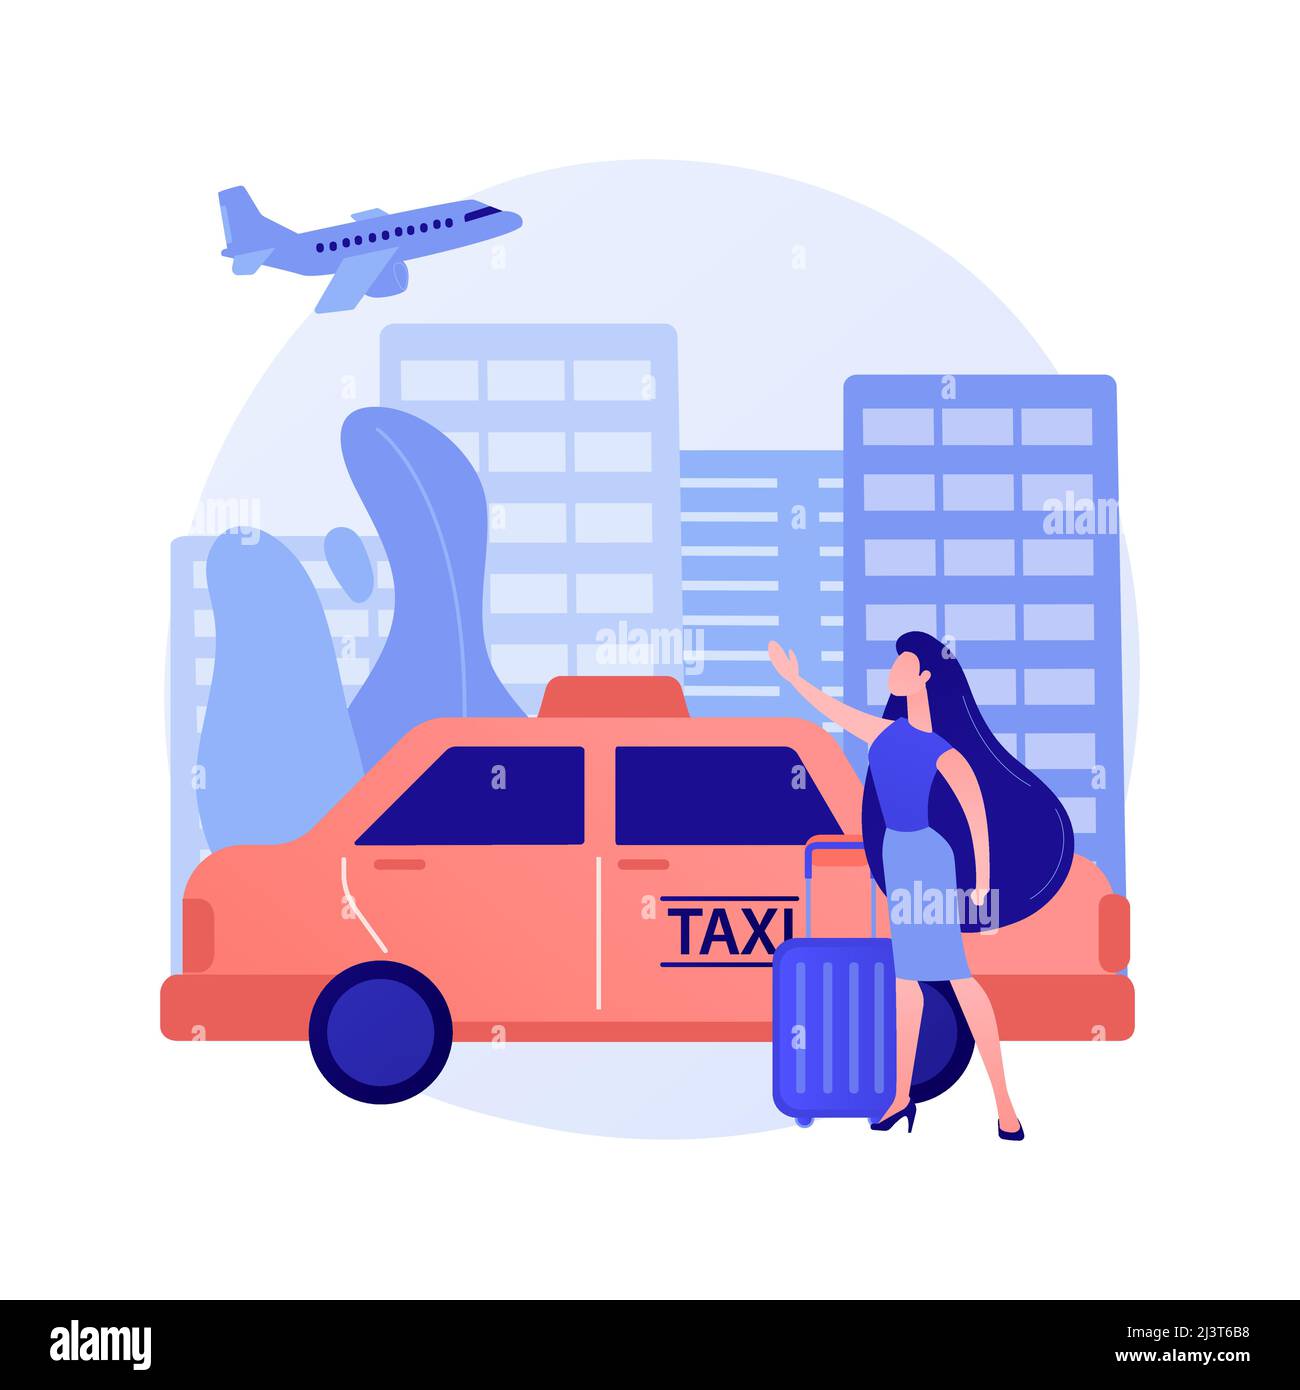 Taxi transfer abstract concept vector illustration. Airport private transfer, freight taxi service, hotel transportation, safe fast journey, professio Stock Vector